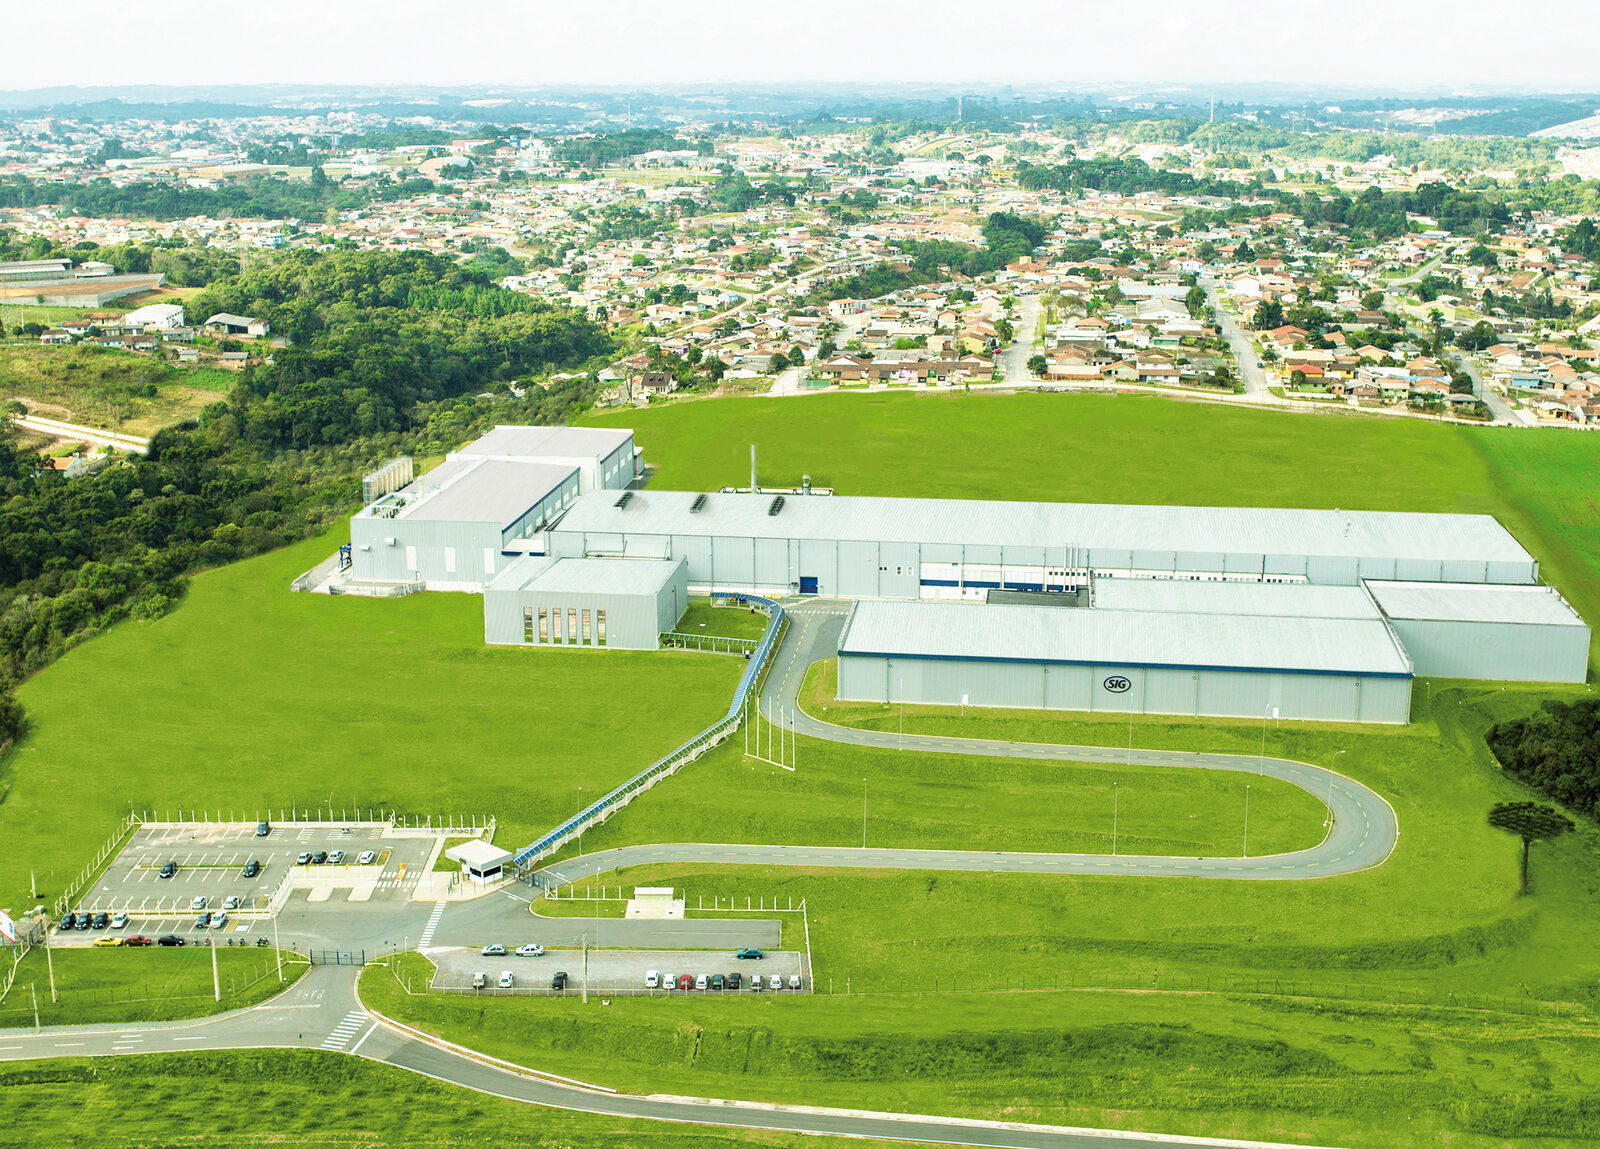 Green Electricity – Production Plant Brazil: